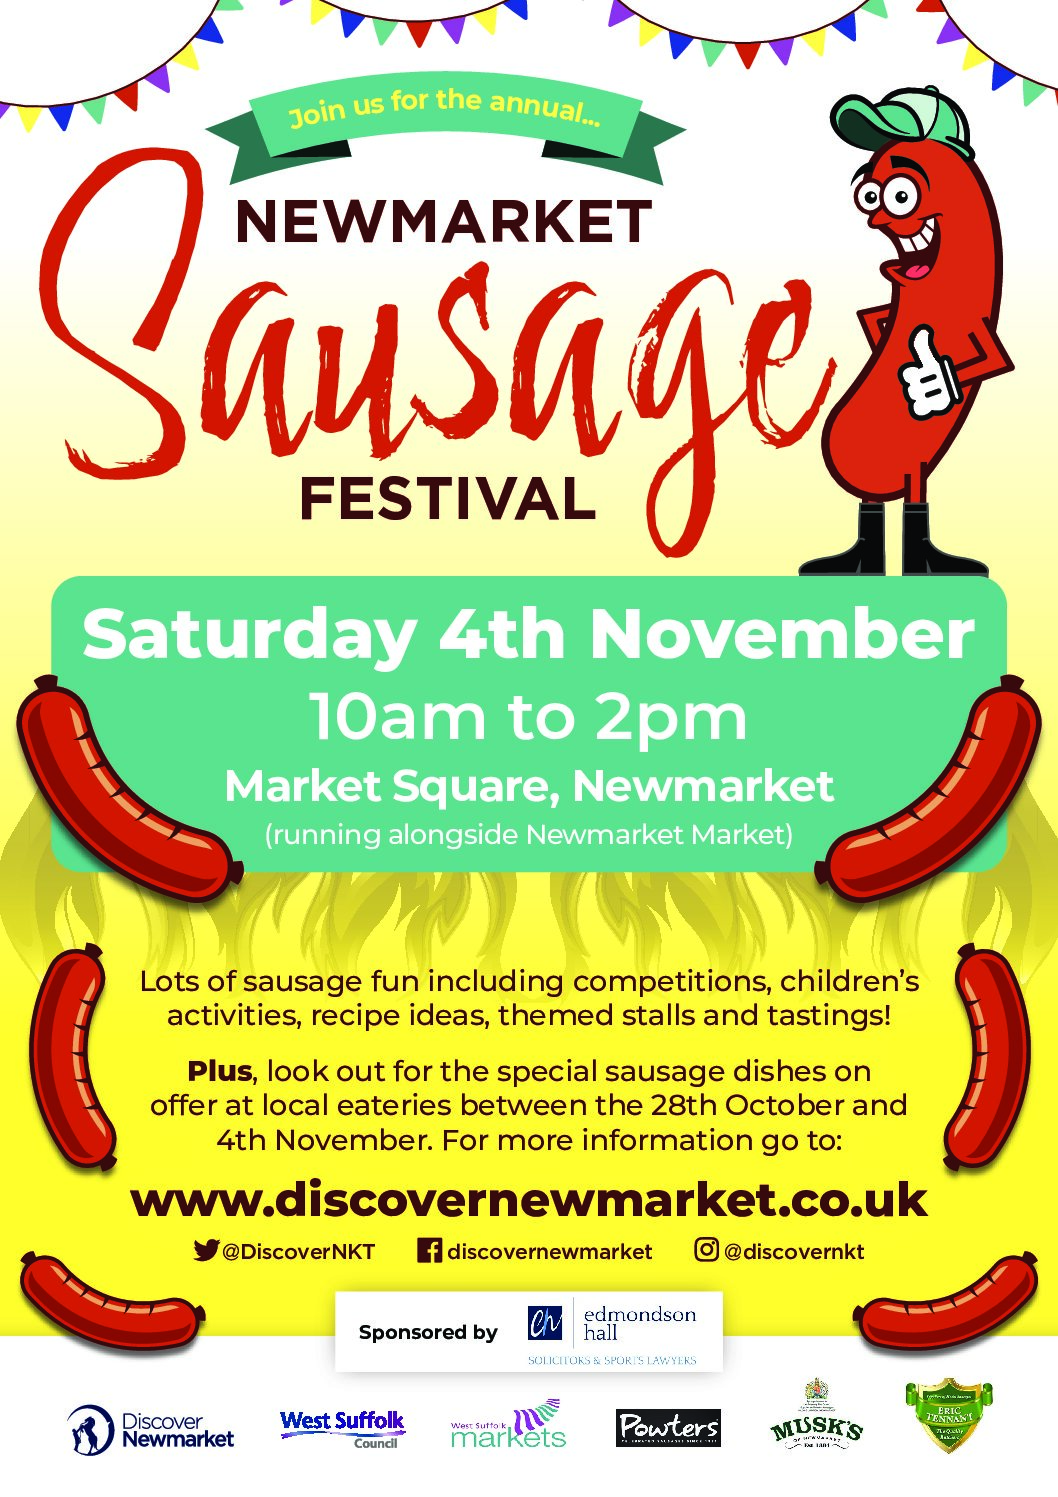 Newmarket Sausage Festival Discover Newmarket Discover Newmarket